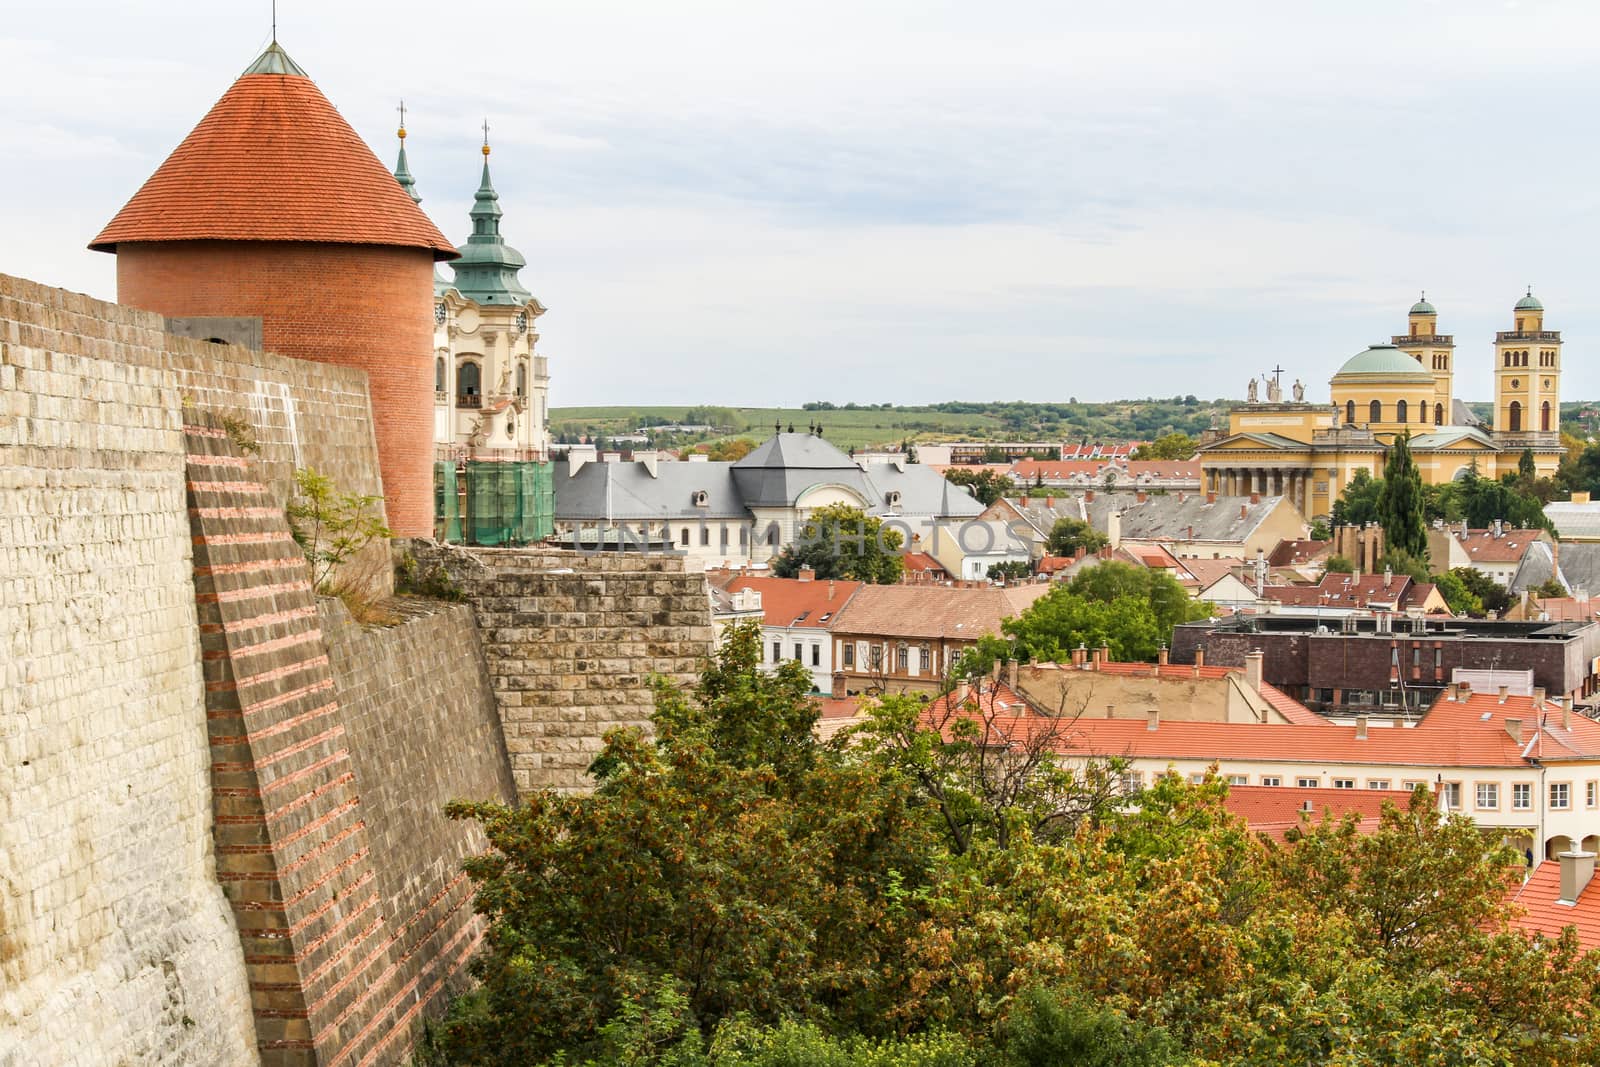 The view of the Basilica from the ruins of the Castle of Eger, Hungary